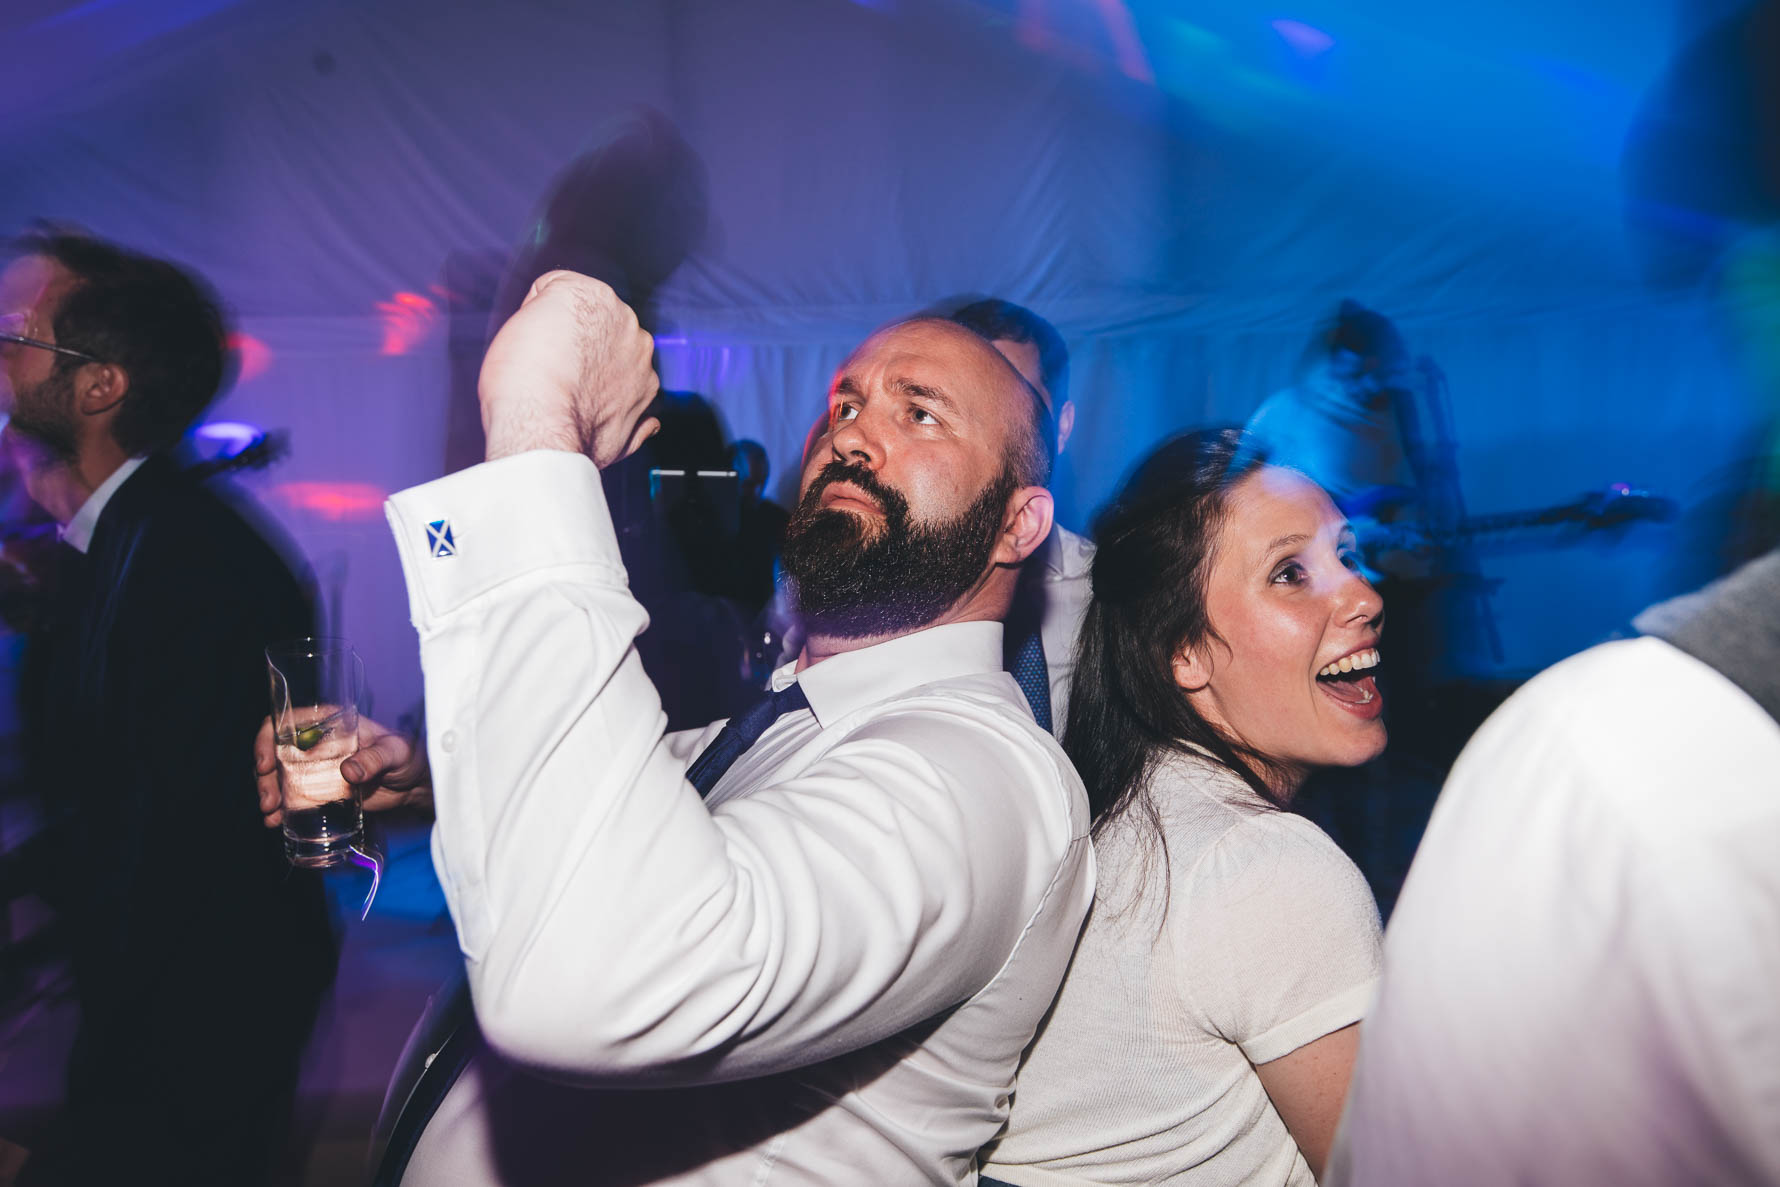 Man with a dark beard wearing a white shirt and a blue tie with his back against a woman's back as they are dancing together at a wedding reception in a marquee. She is wearing a white top. There are blue lights in the background.